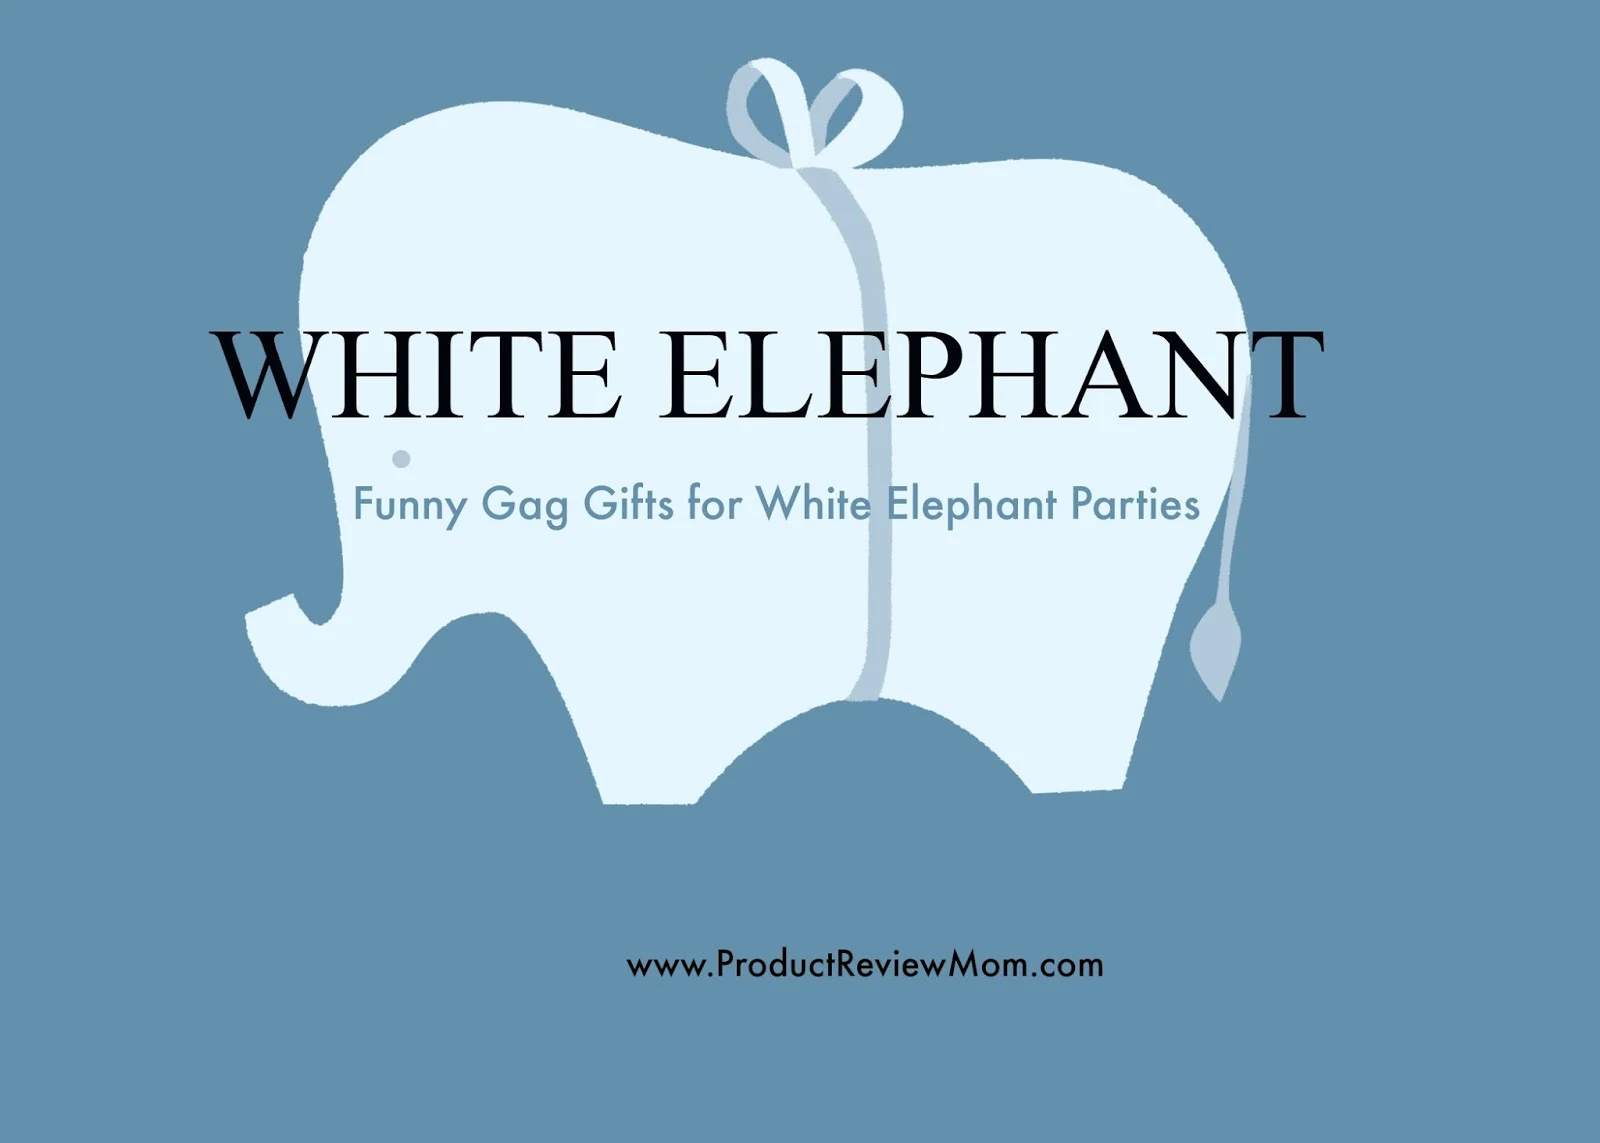 Funny Gag Gifts for White Elephant Parties  via  www.productreviewmom.com